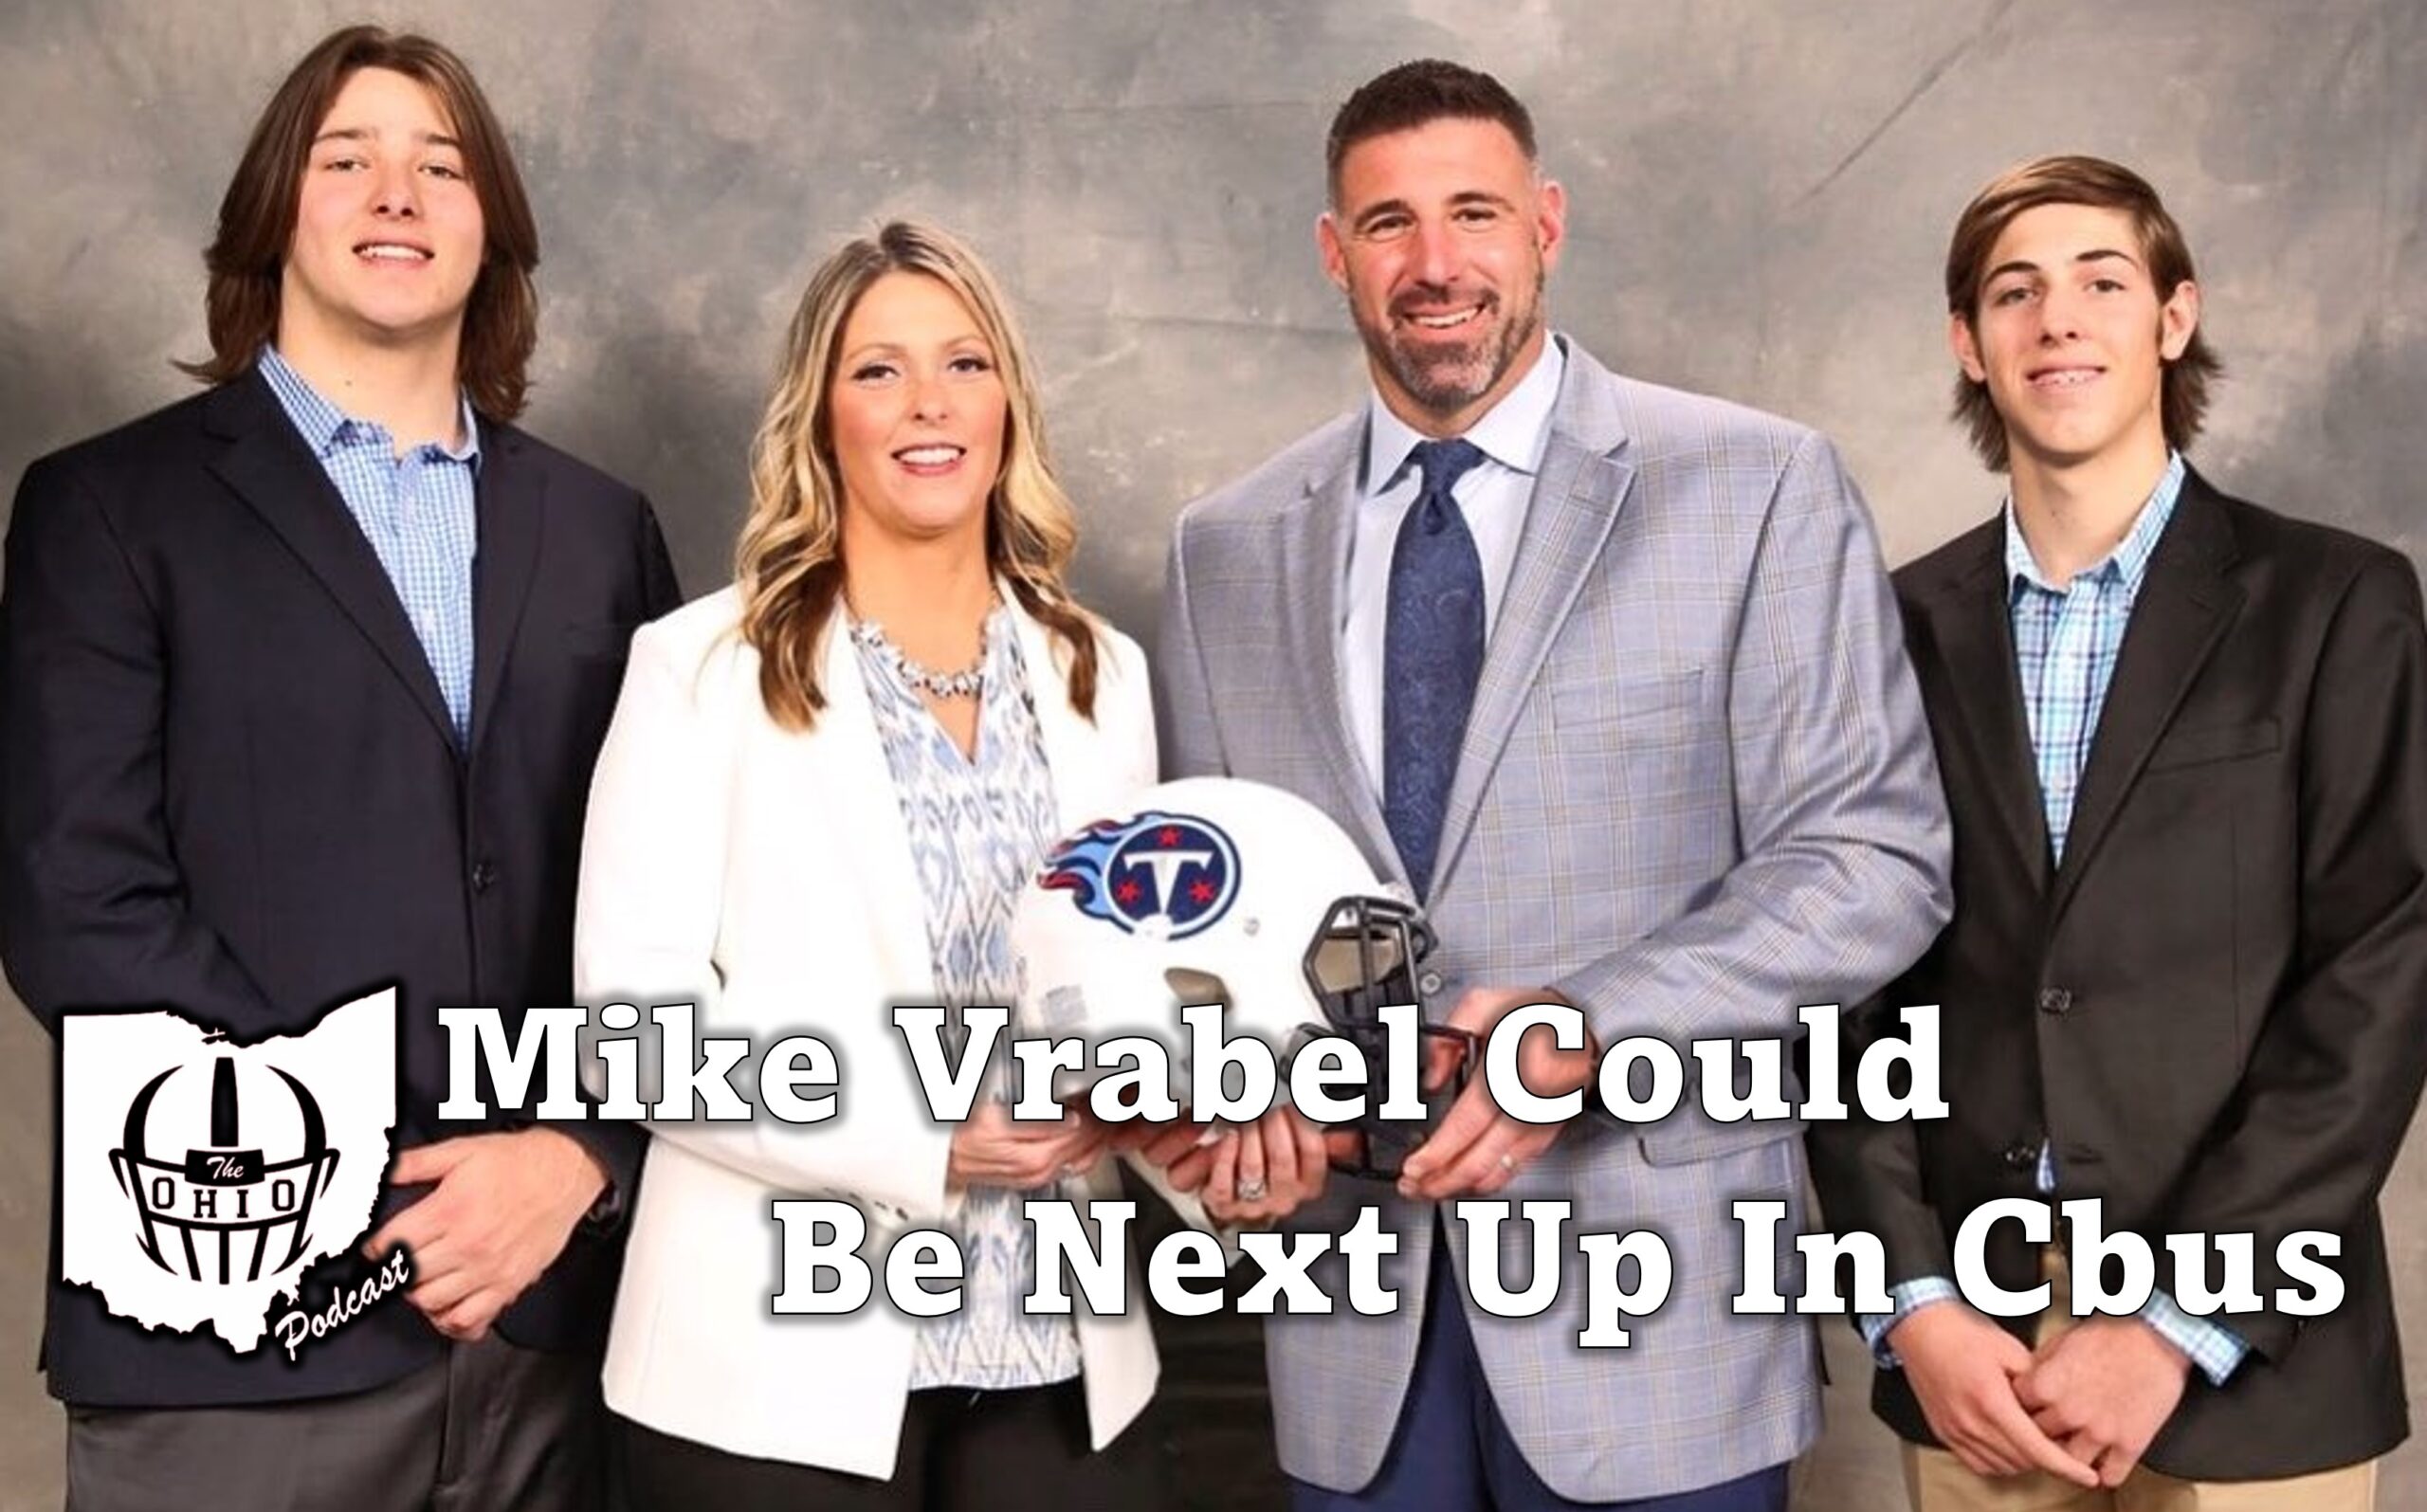 Mike Vrabel’s Unexpected Career Shift and Potential Future with Ohio State